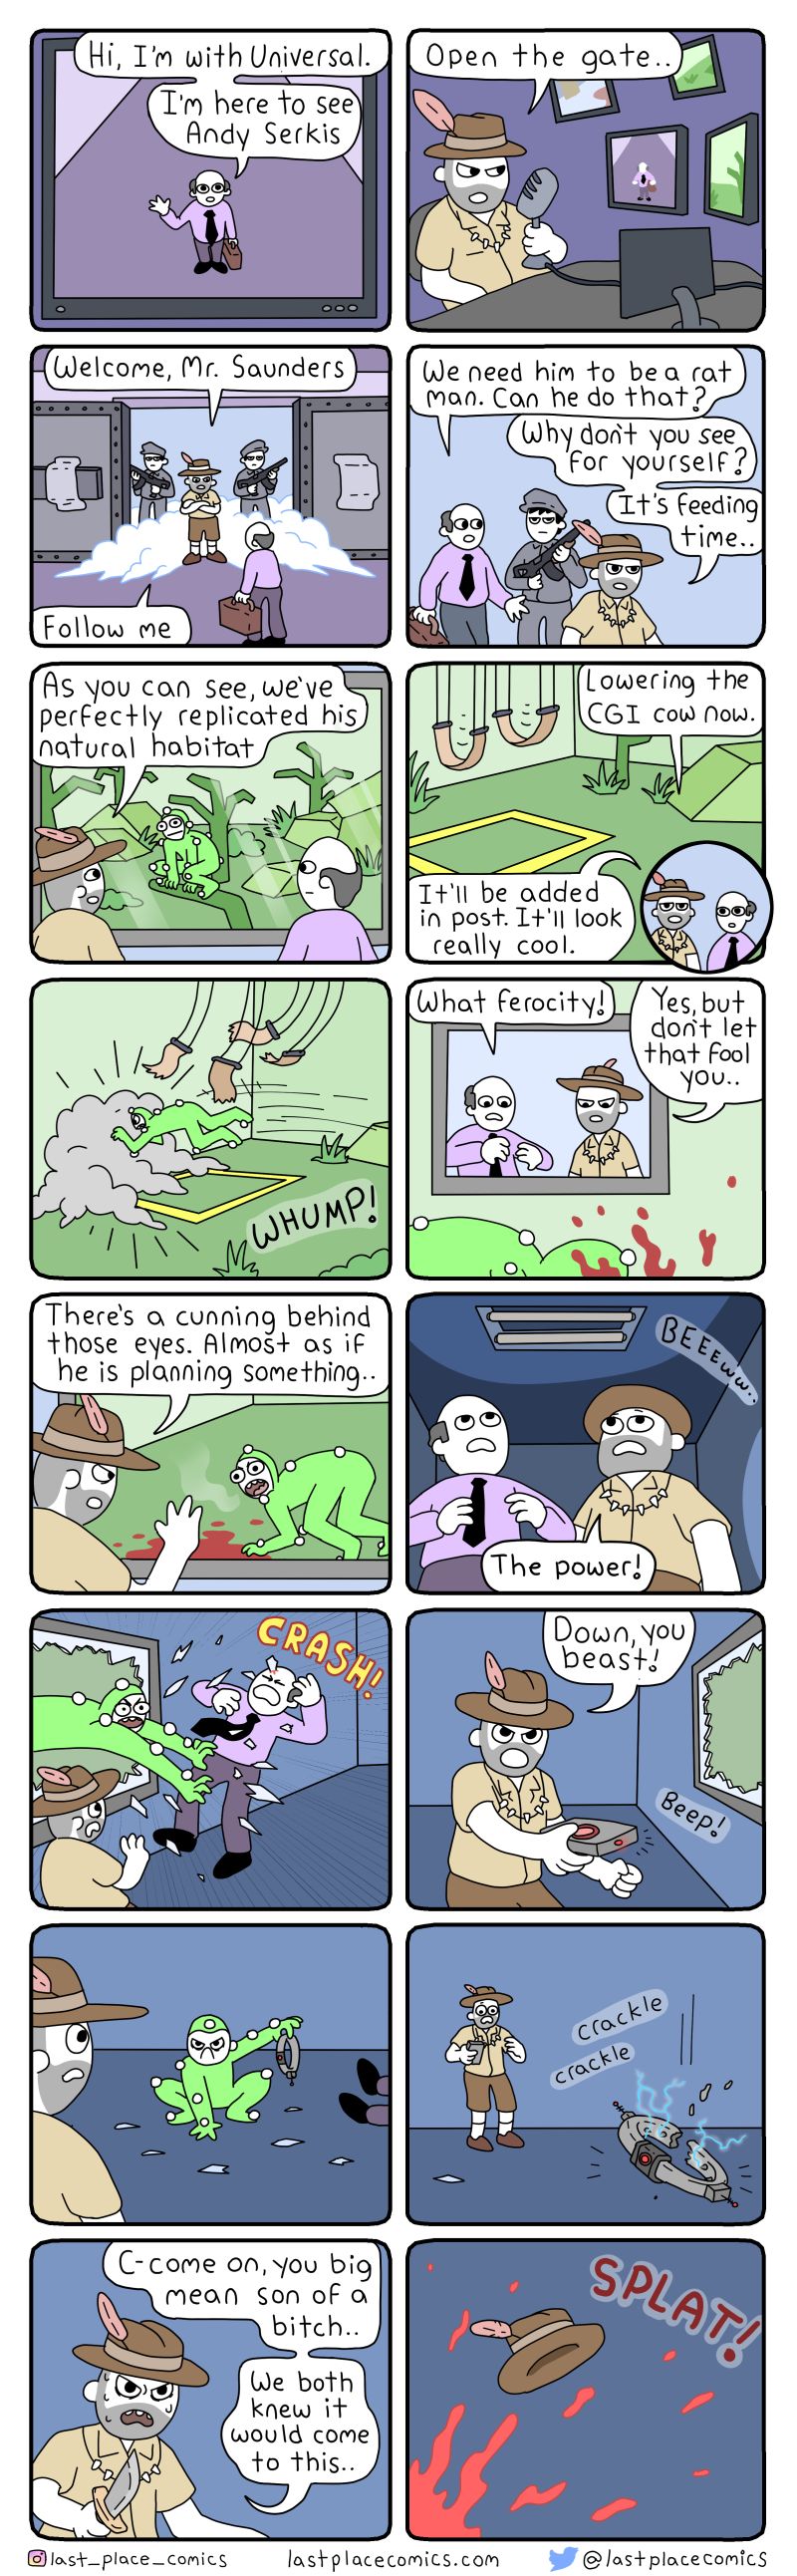 comic, webcomic, last place comics, andy serkis, lord of the rings, parody, green screen, containment, monster, green, room, handlers, hunter, breaks free